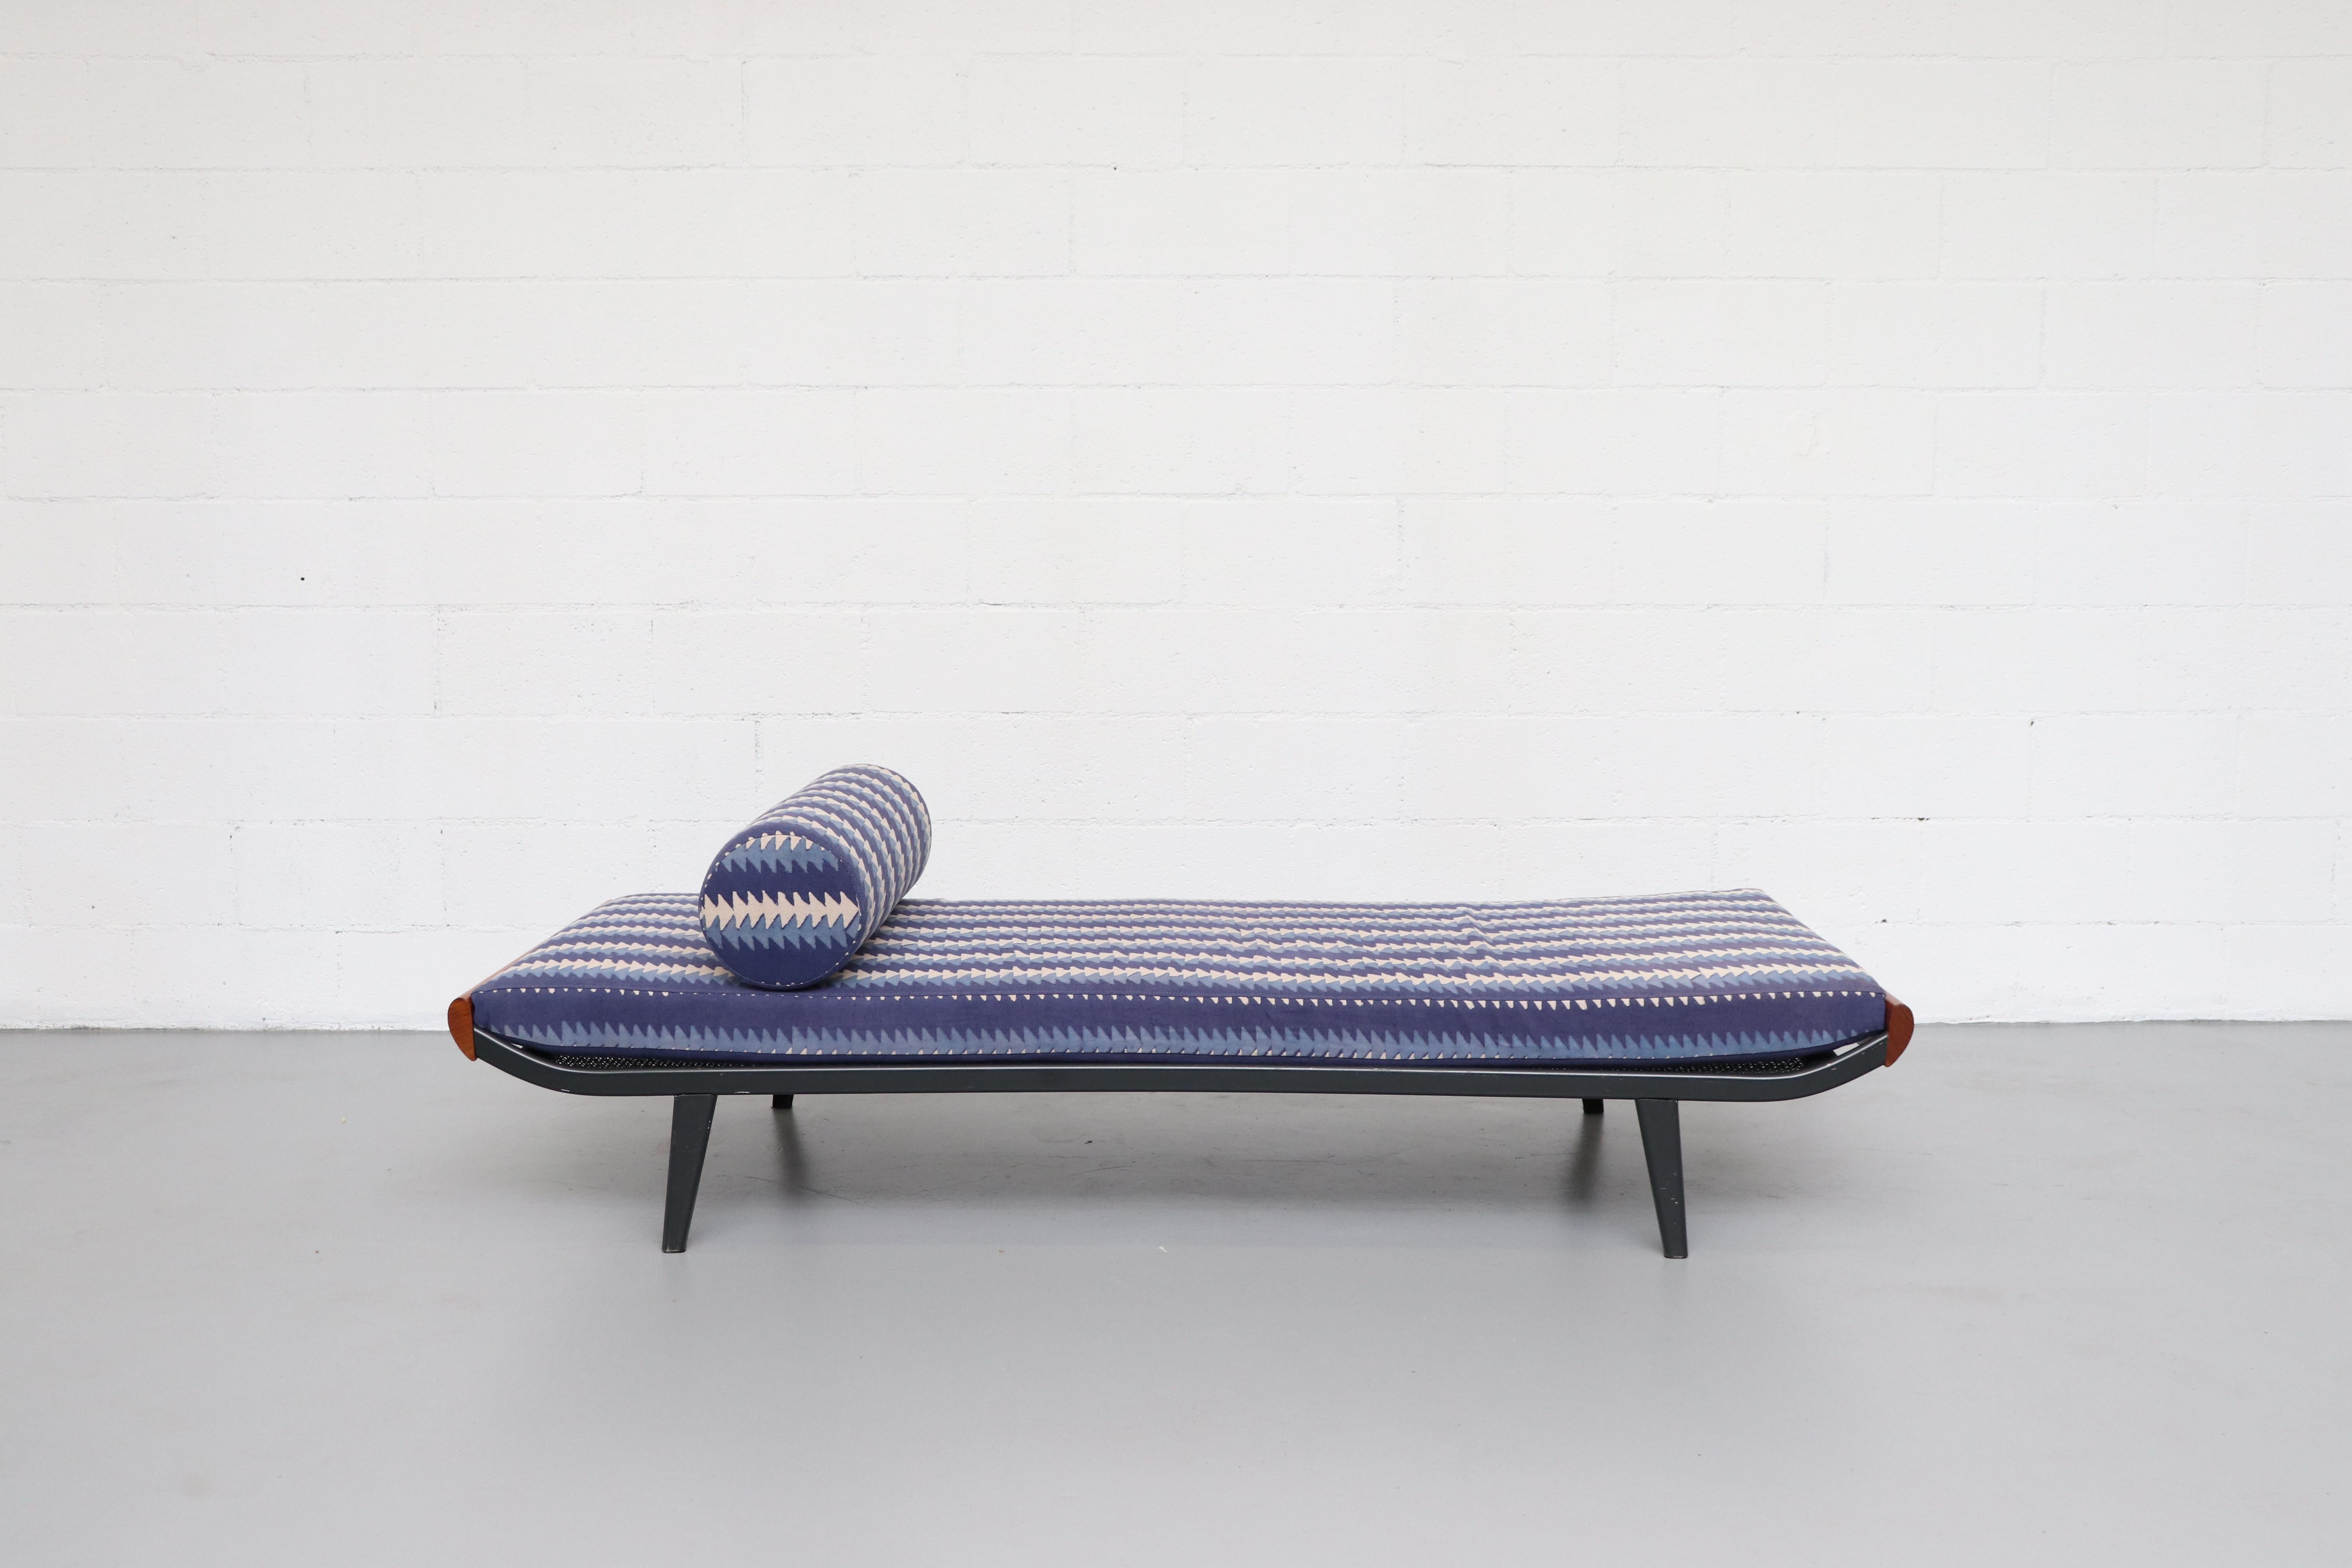 Part of our special limited edition collaboration with Los Angeles textile studio Block Shop. 1960s Cleopatra-style daybed by A.R. Cordemeyer for Auping with teak ends and dark charcoal grey enameled metal frame with 